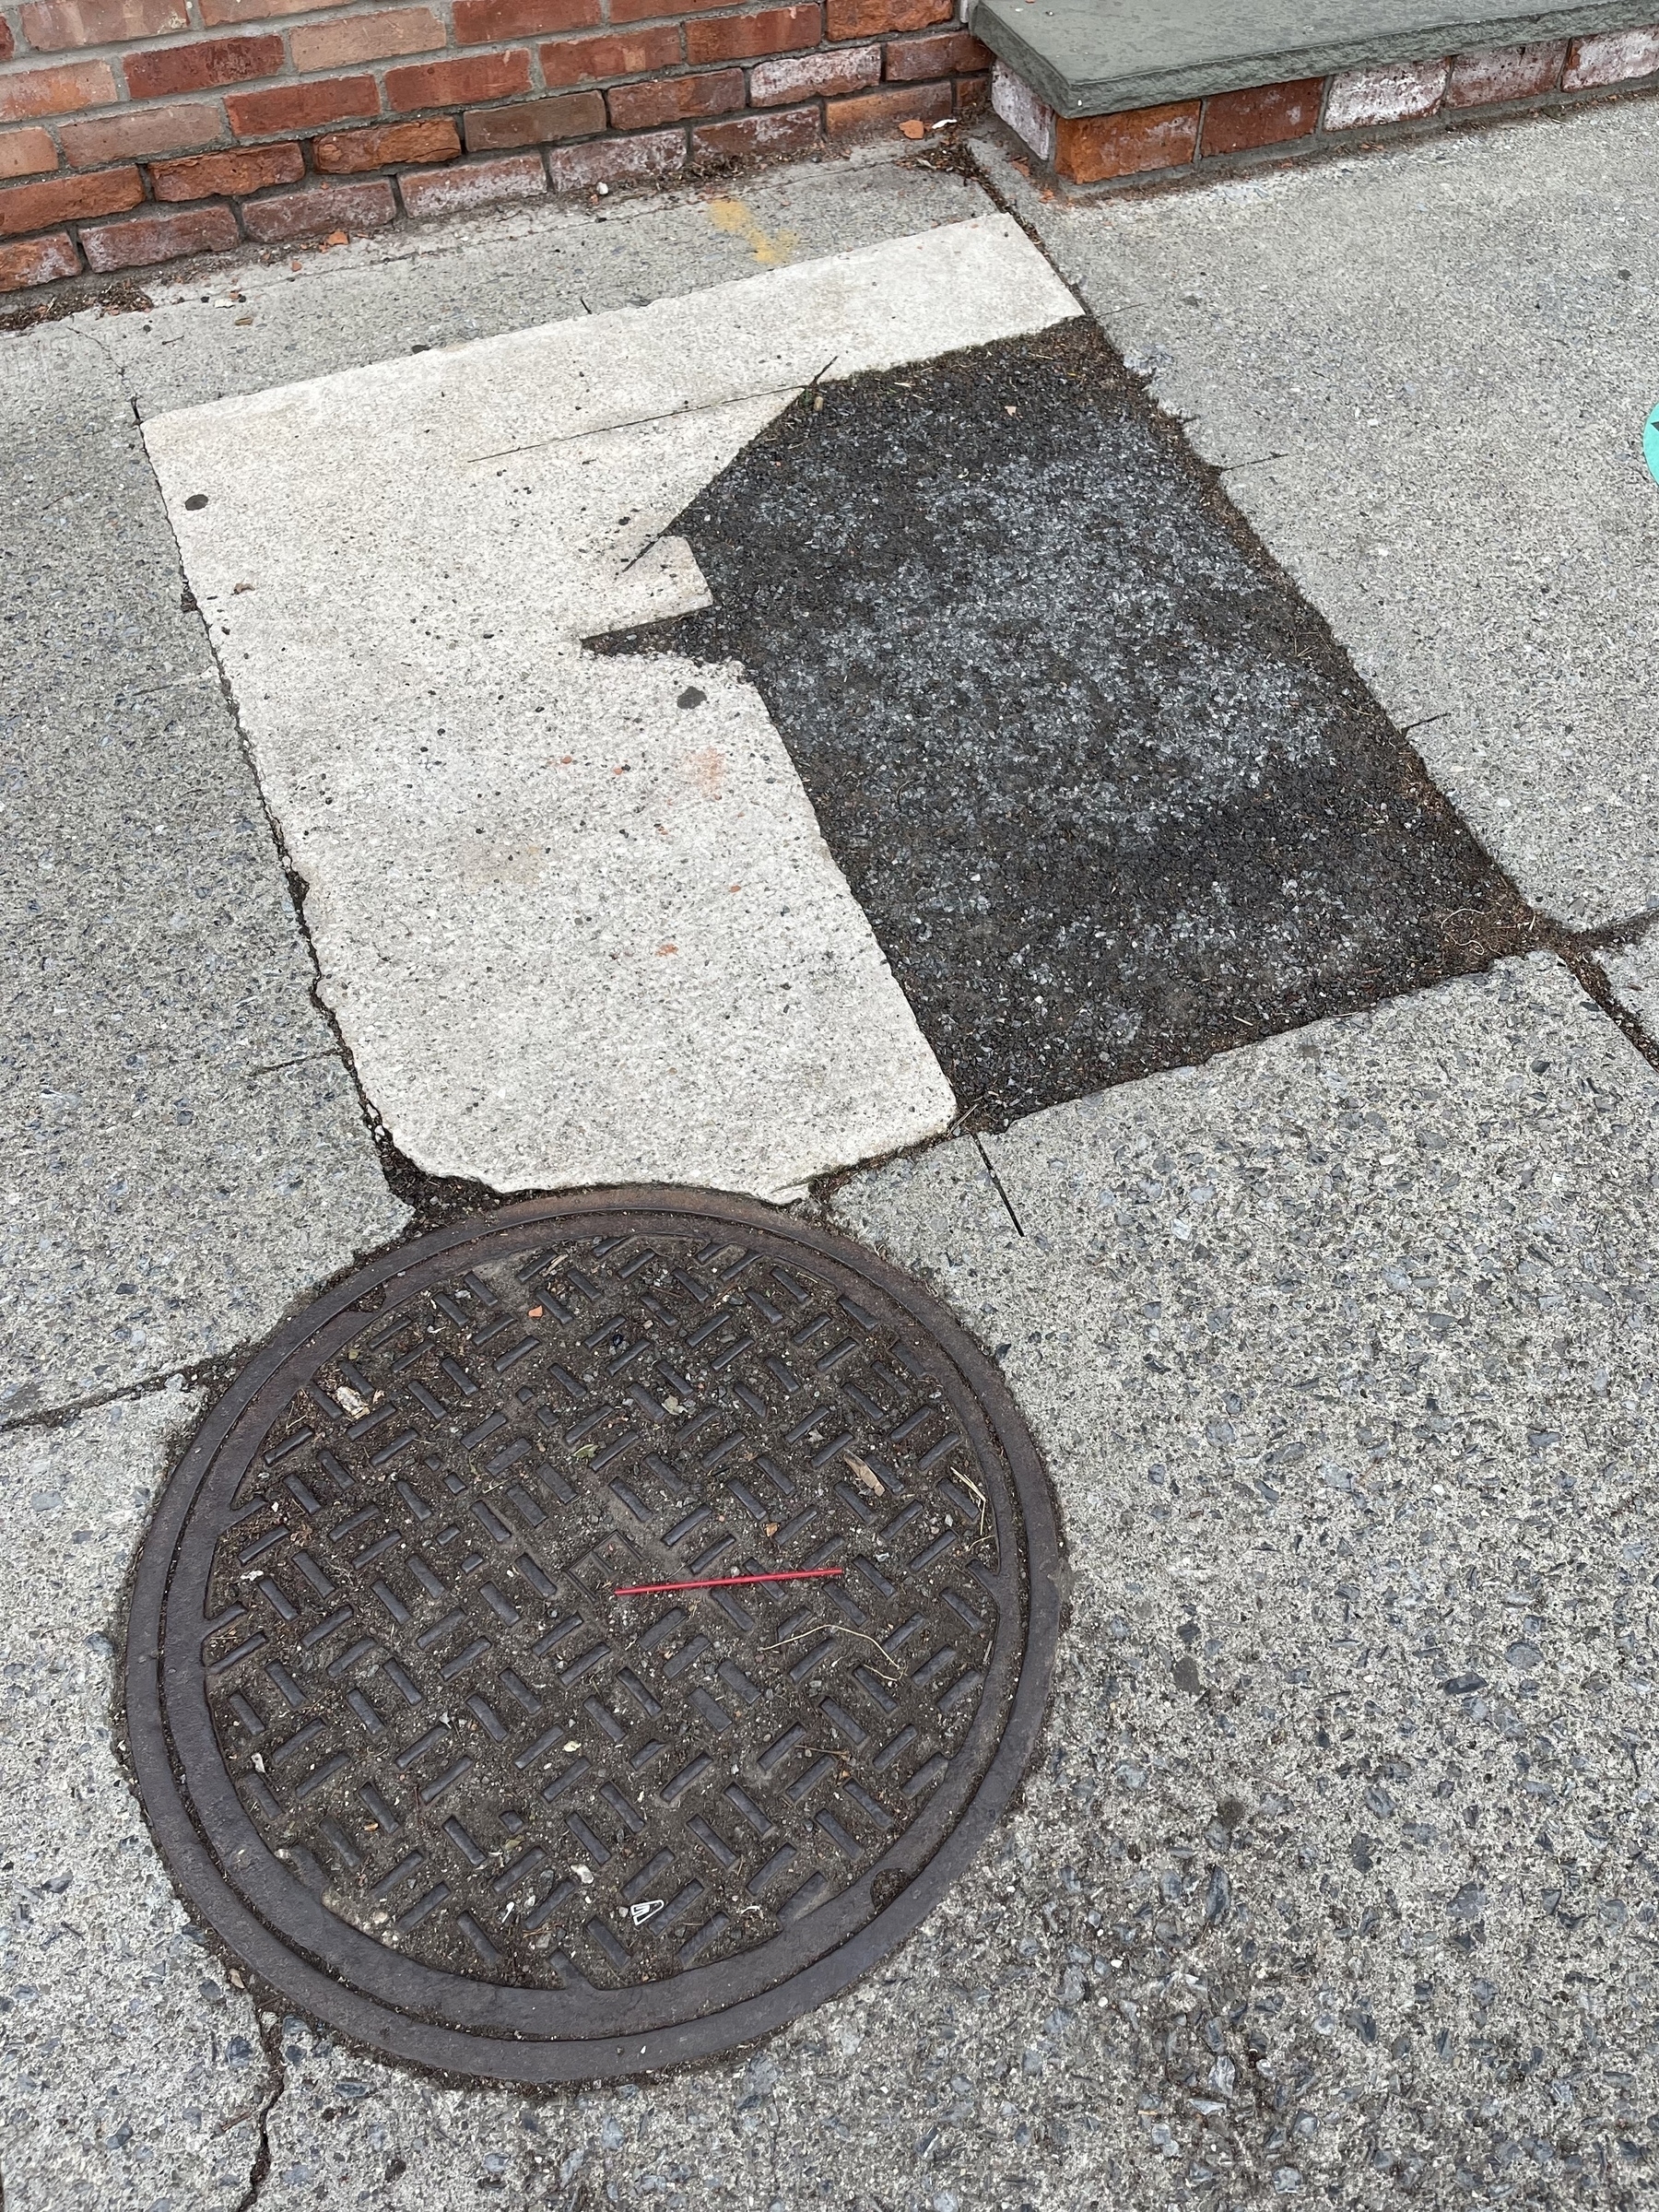 Circle and rectangle composition of manhole cover and sidewalk repair patching.